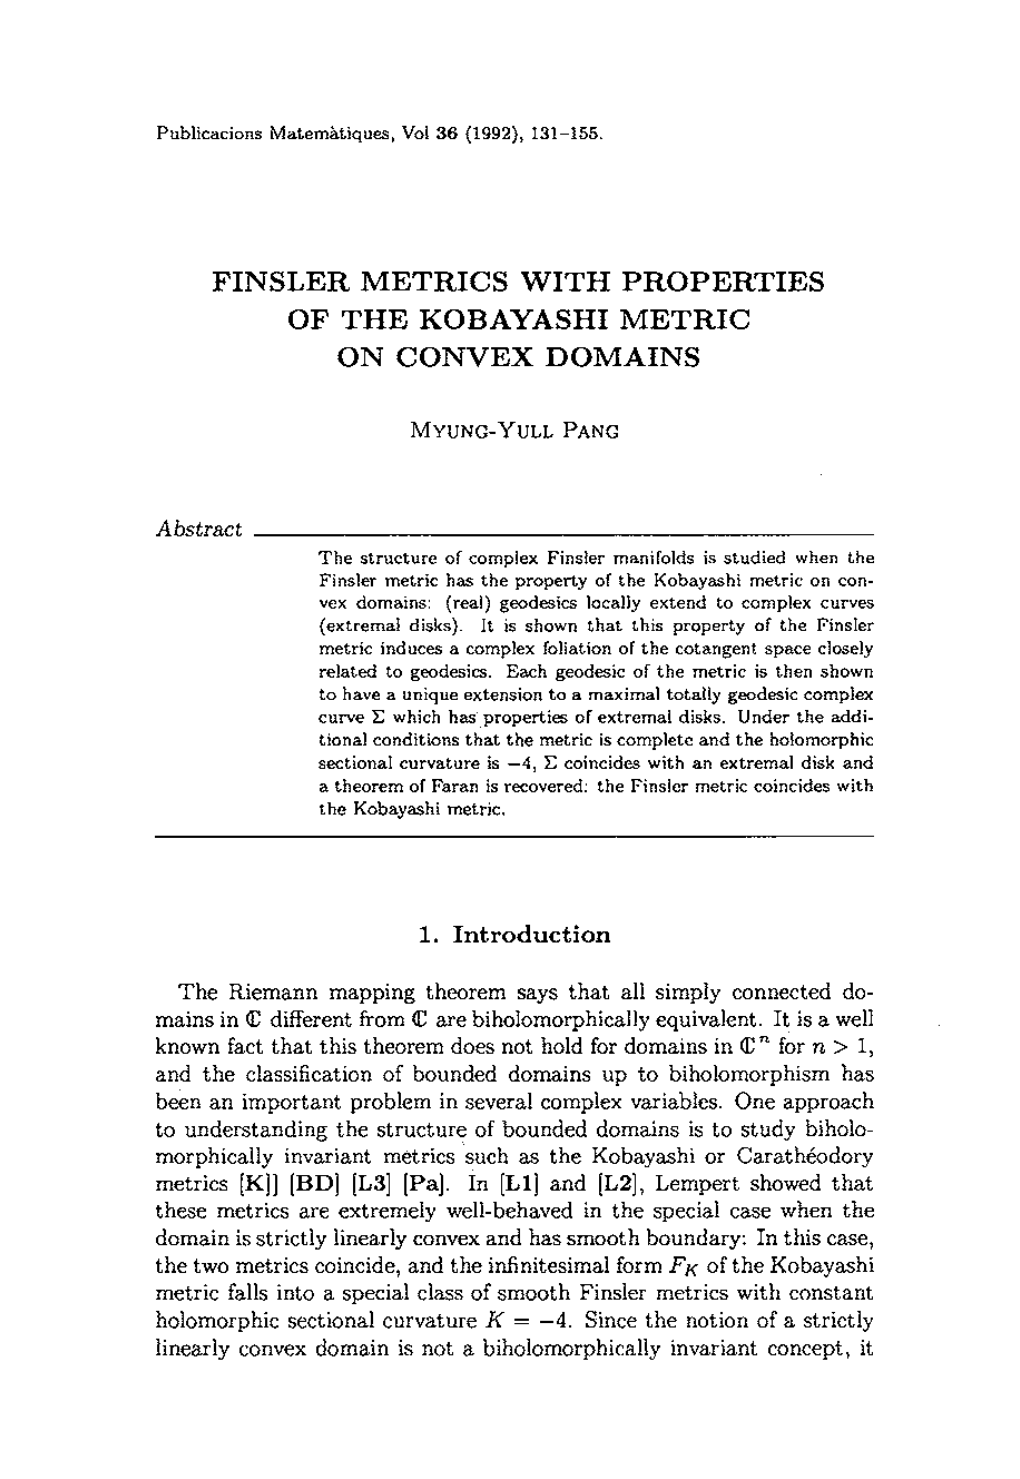 Abstract FINSLER METRICS with PROPERTIES of the KOBAYASHI METRIC on CONVEX DOMAINS